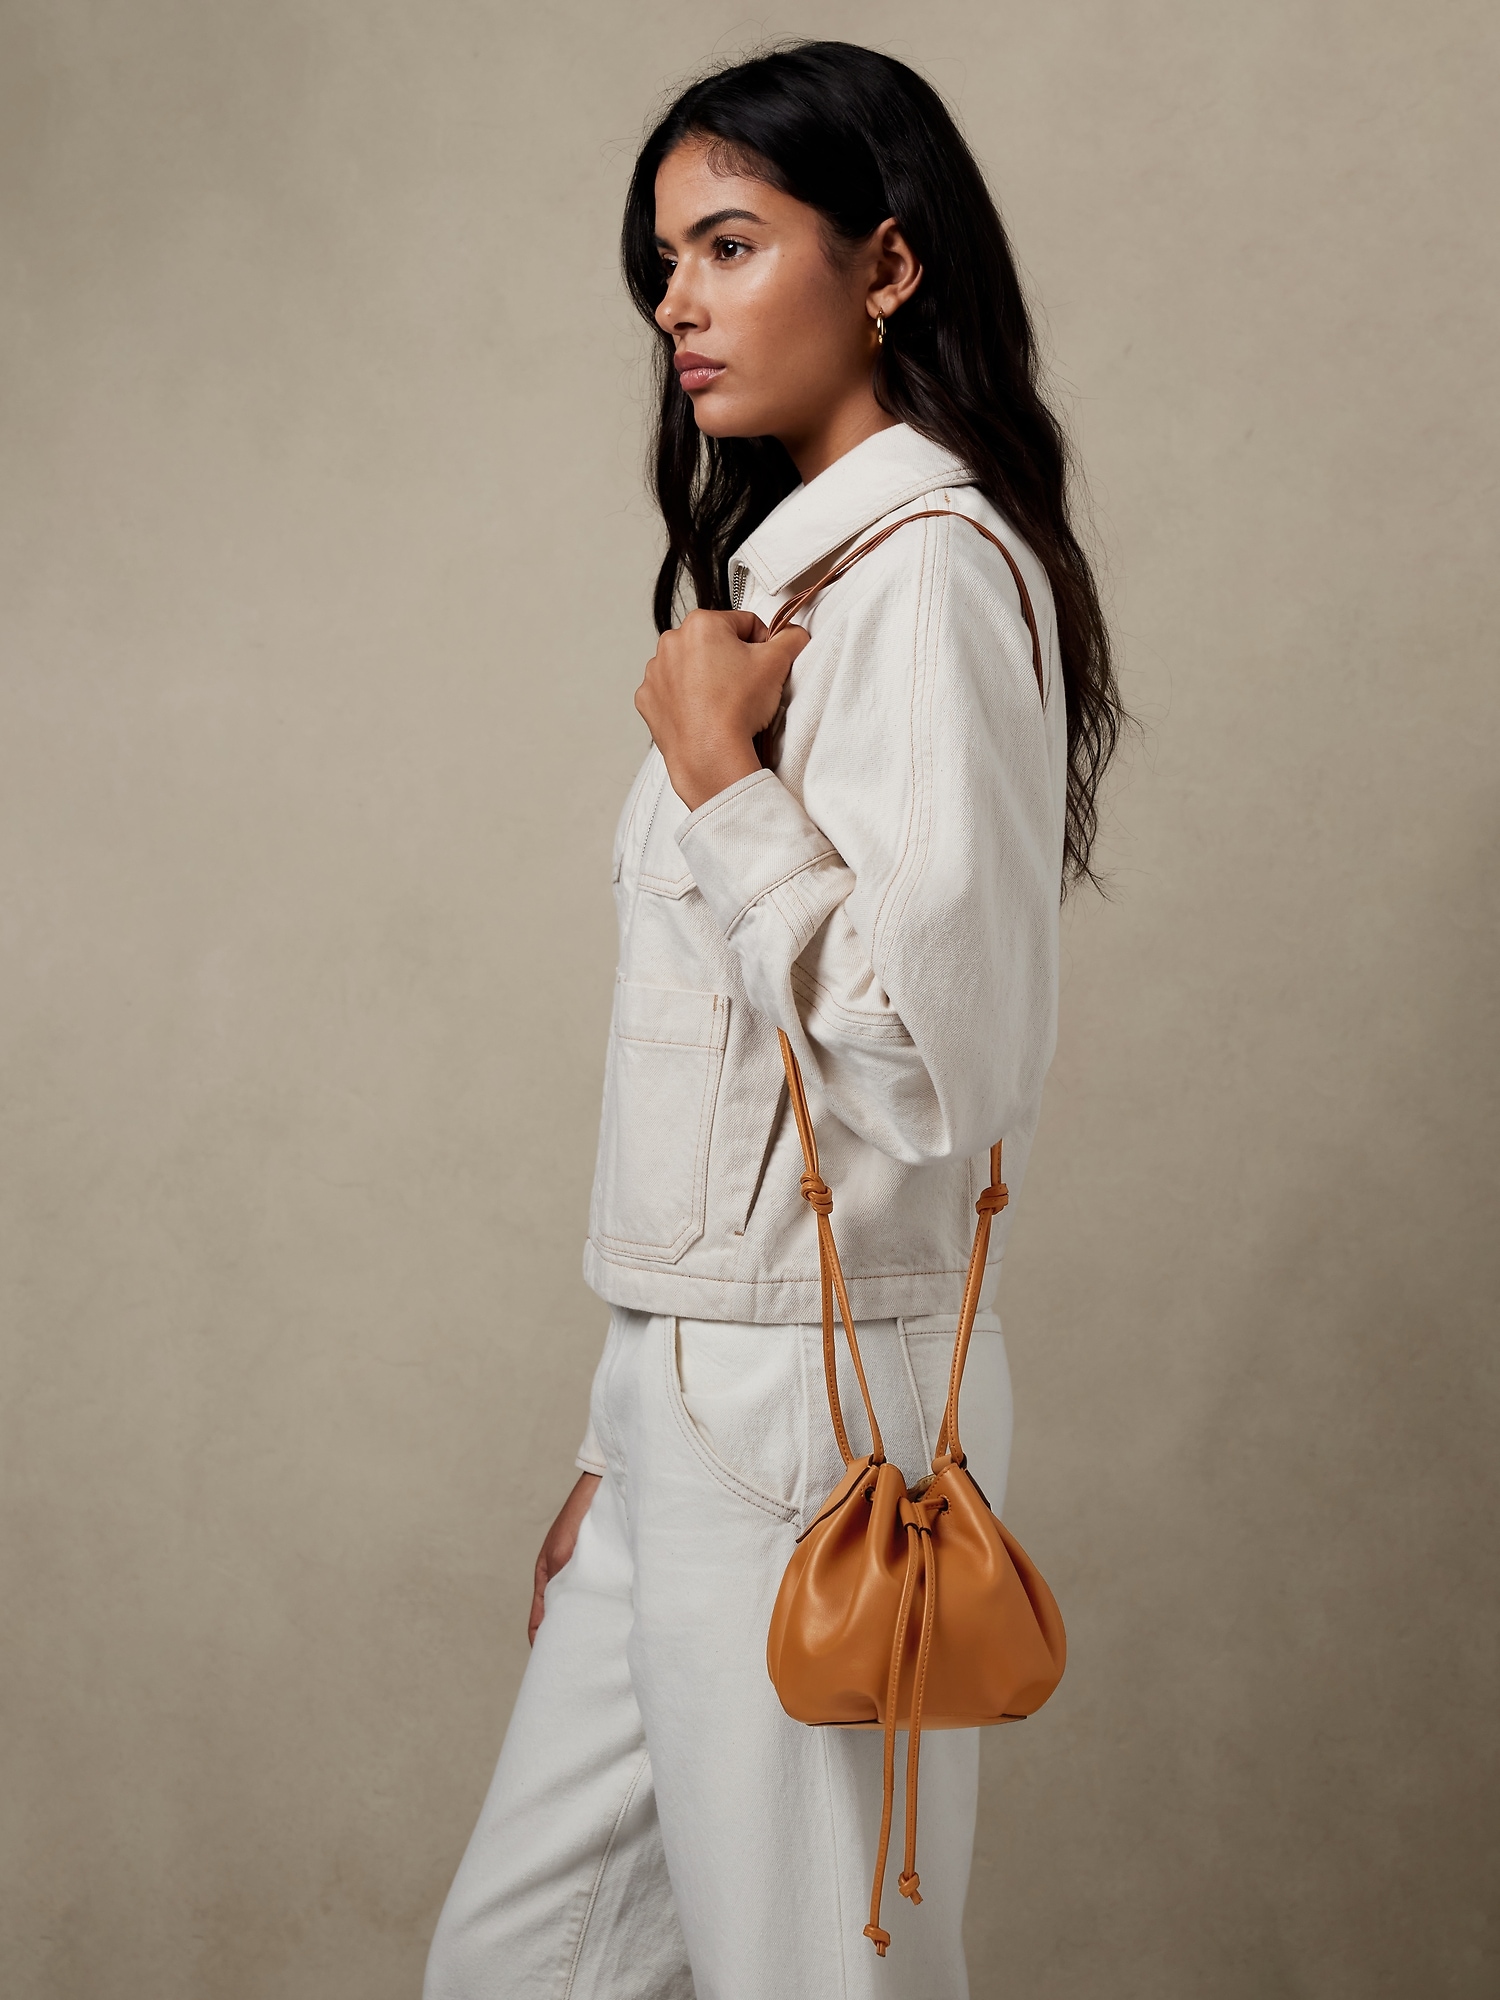 Designer Leather Crescent Shoulder Bag With Wallet 2022 Womens Handbag And  Purse From Ai837, $44.97 | DHgate.Com